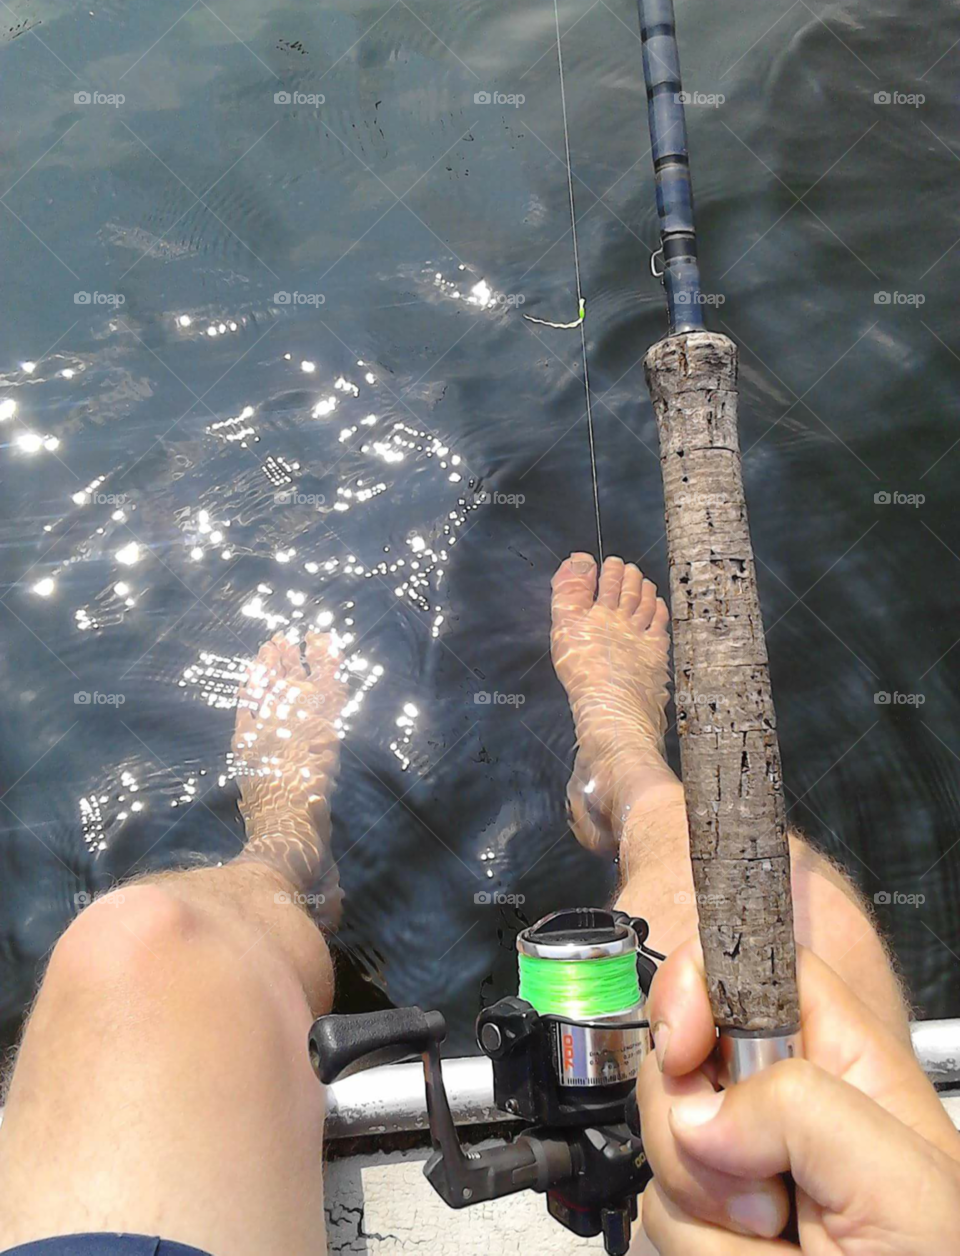 Nothing like cooling off while fishing.